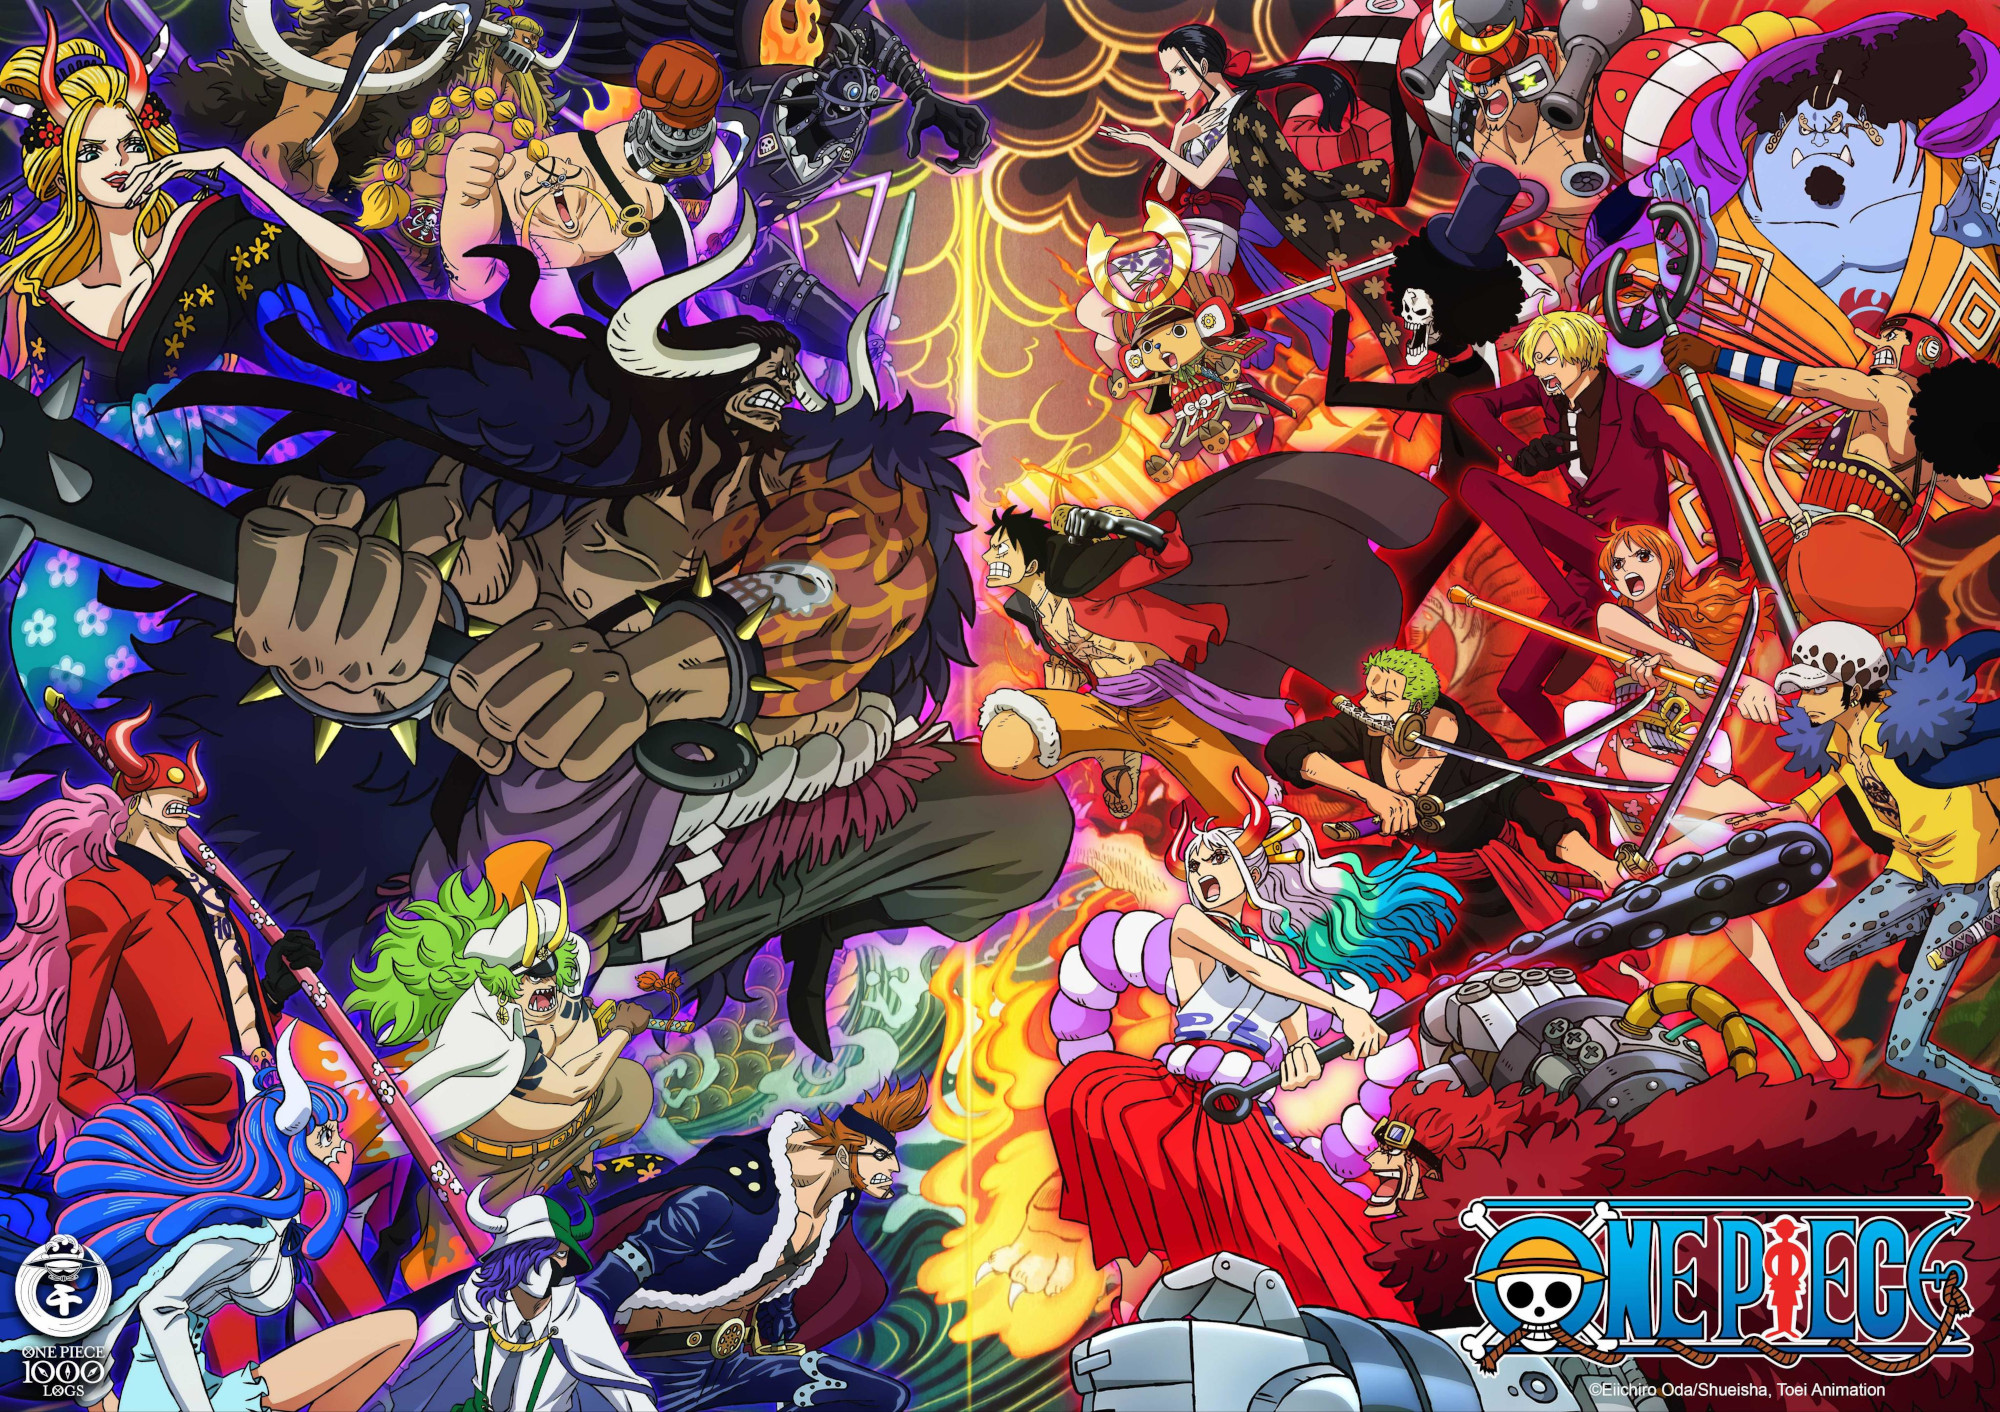 'One Piece' key art for our article about chapter 1055's release time. It features Luffy and the Straw Hats, who look like they're about to fight their enemy.